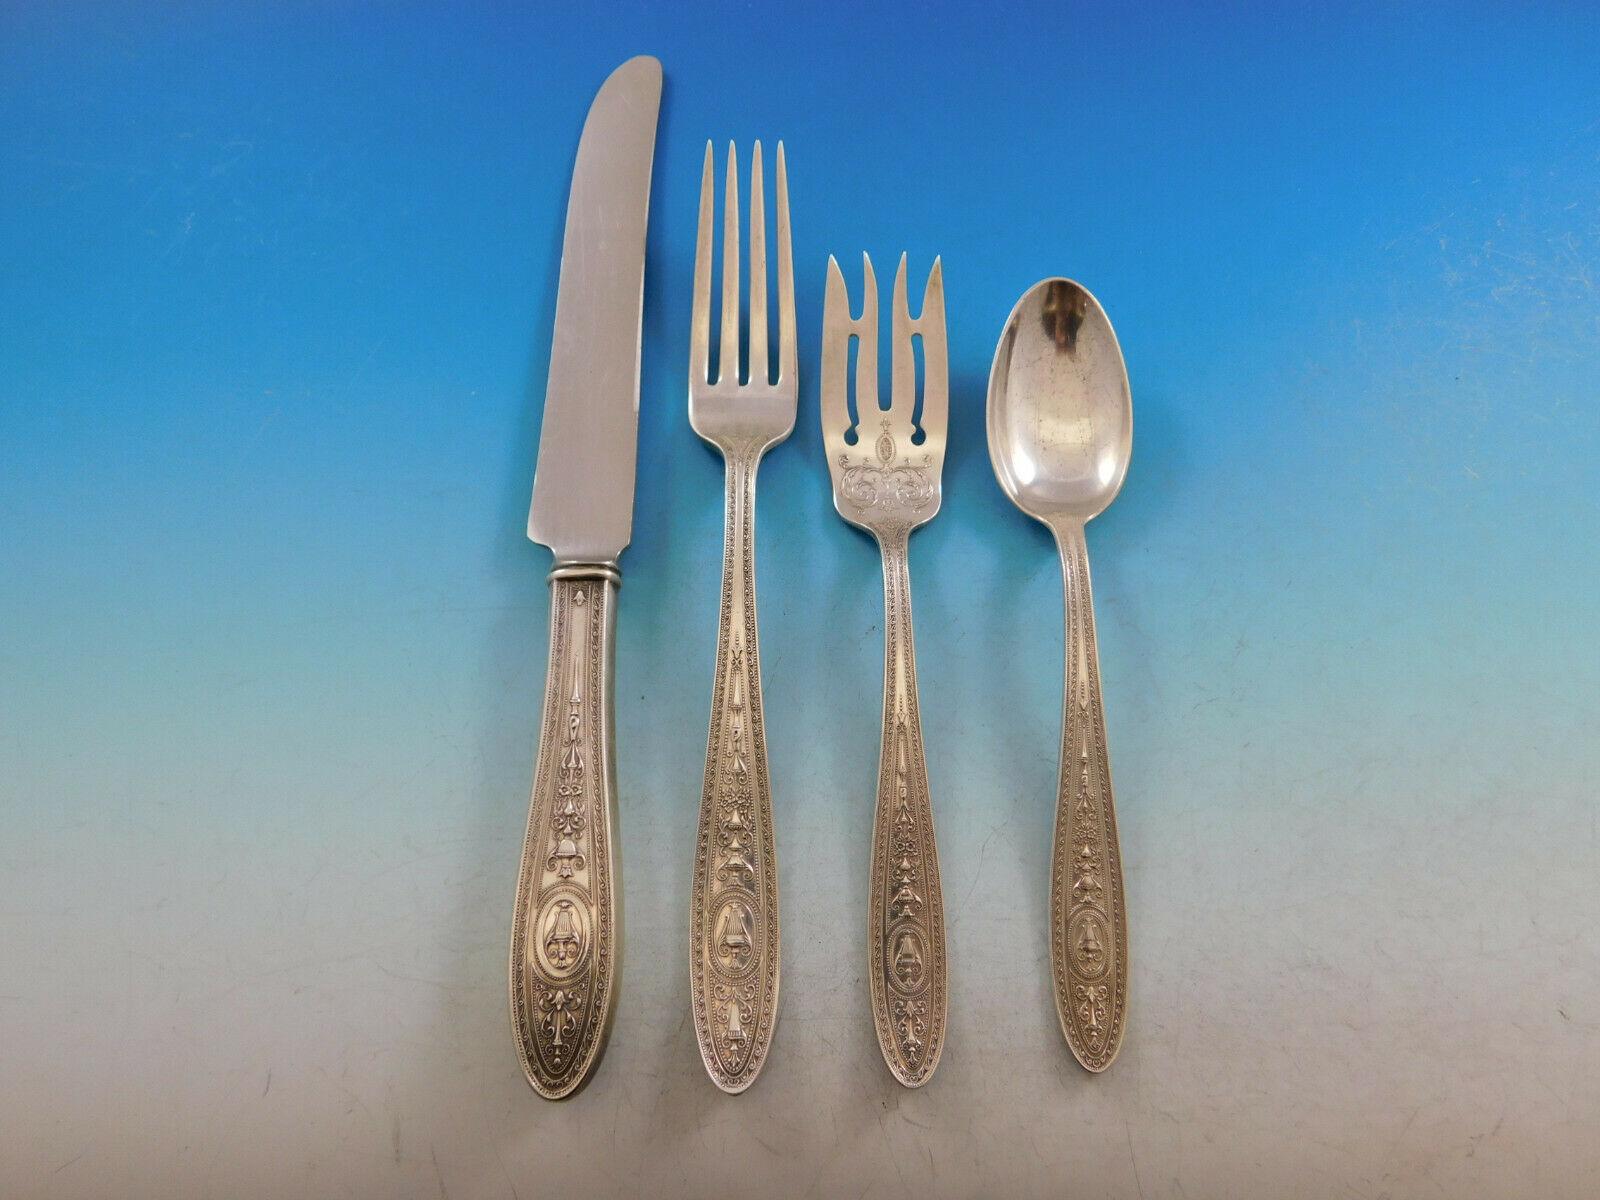 Outstanding Wedgwood by International sterling silver flatware set - 107 pieces. This set includes:

8 knives, 9